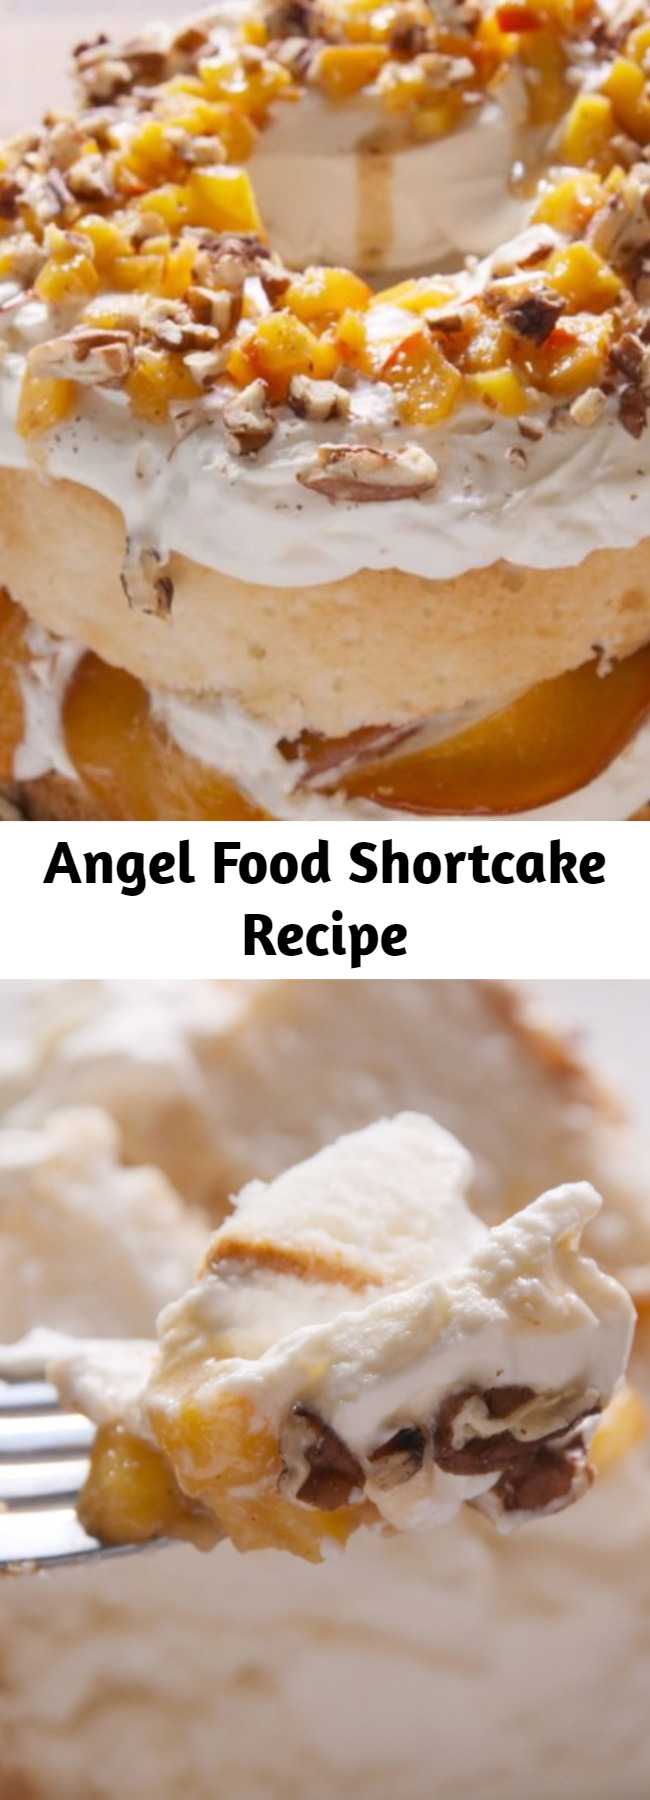 Angel Food Shortcake Recipe - You'll be feeling heavenly with this Angel Food Shortcake recipe. This peaches and cream angel food cake is truly divine 😇.